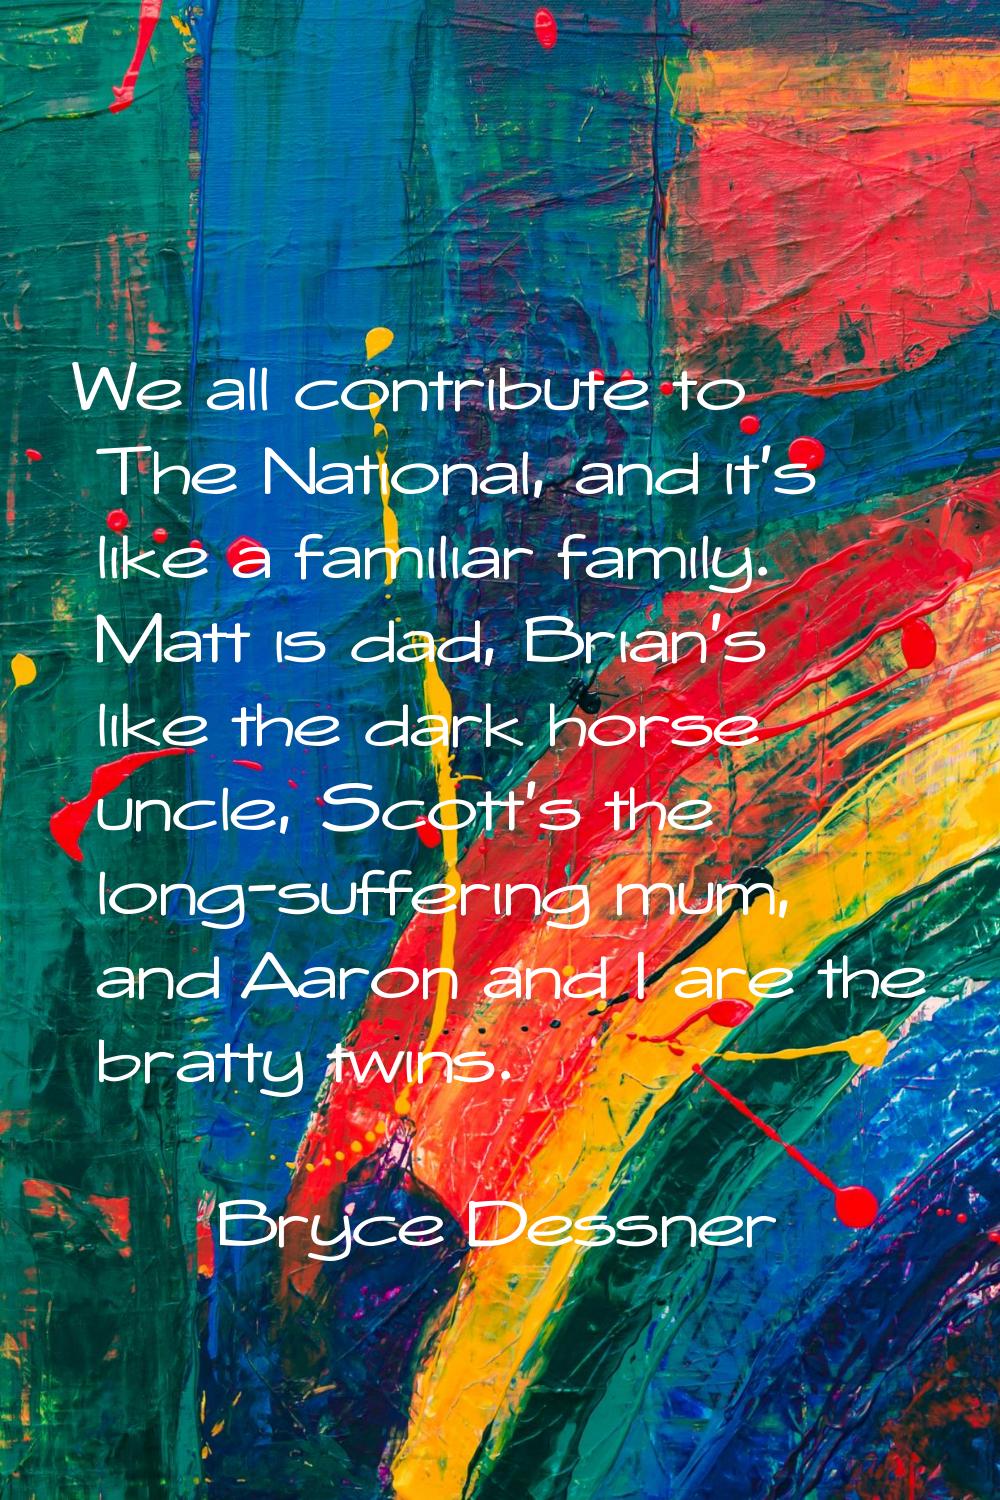 We all contribute to The National, and it's like a familiar family. Matt is dad, Brian's like the d